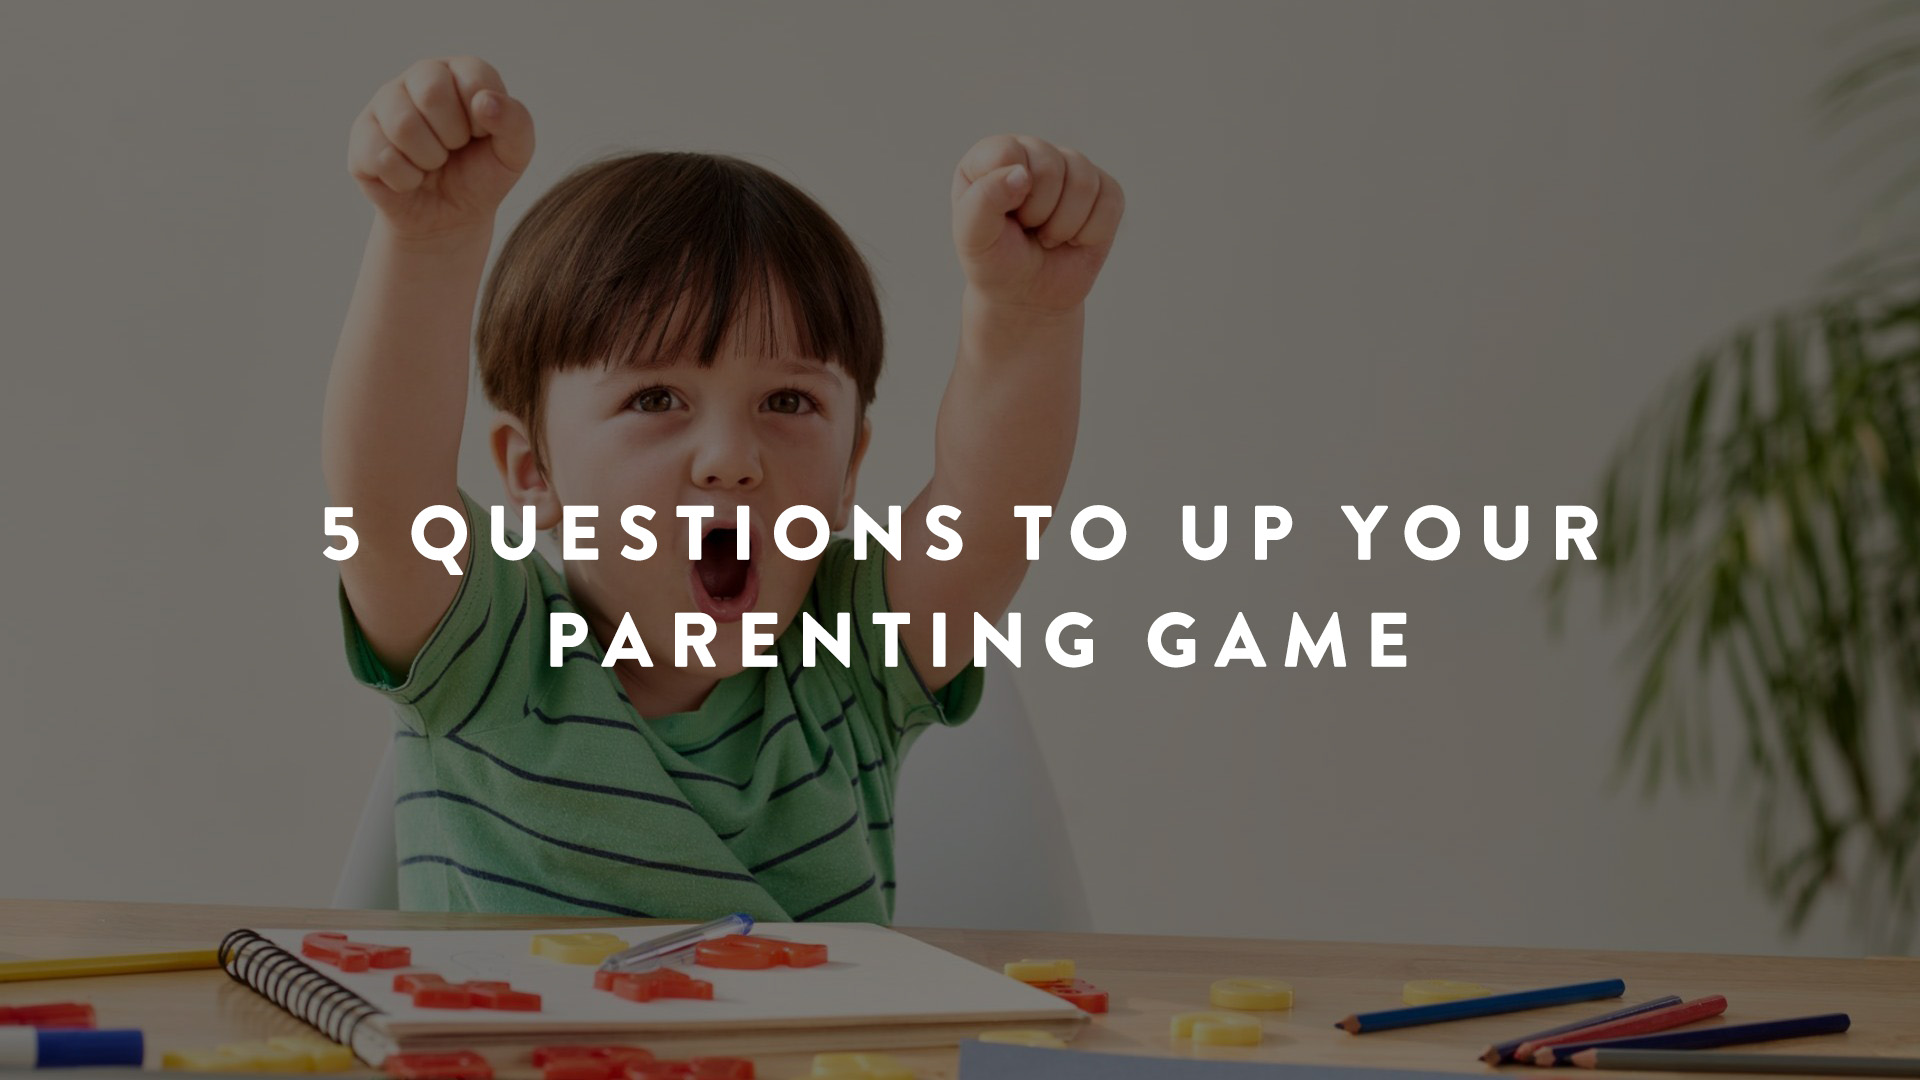 5 Questions to Up Your Parenting Game